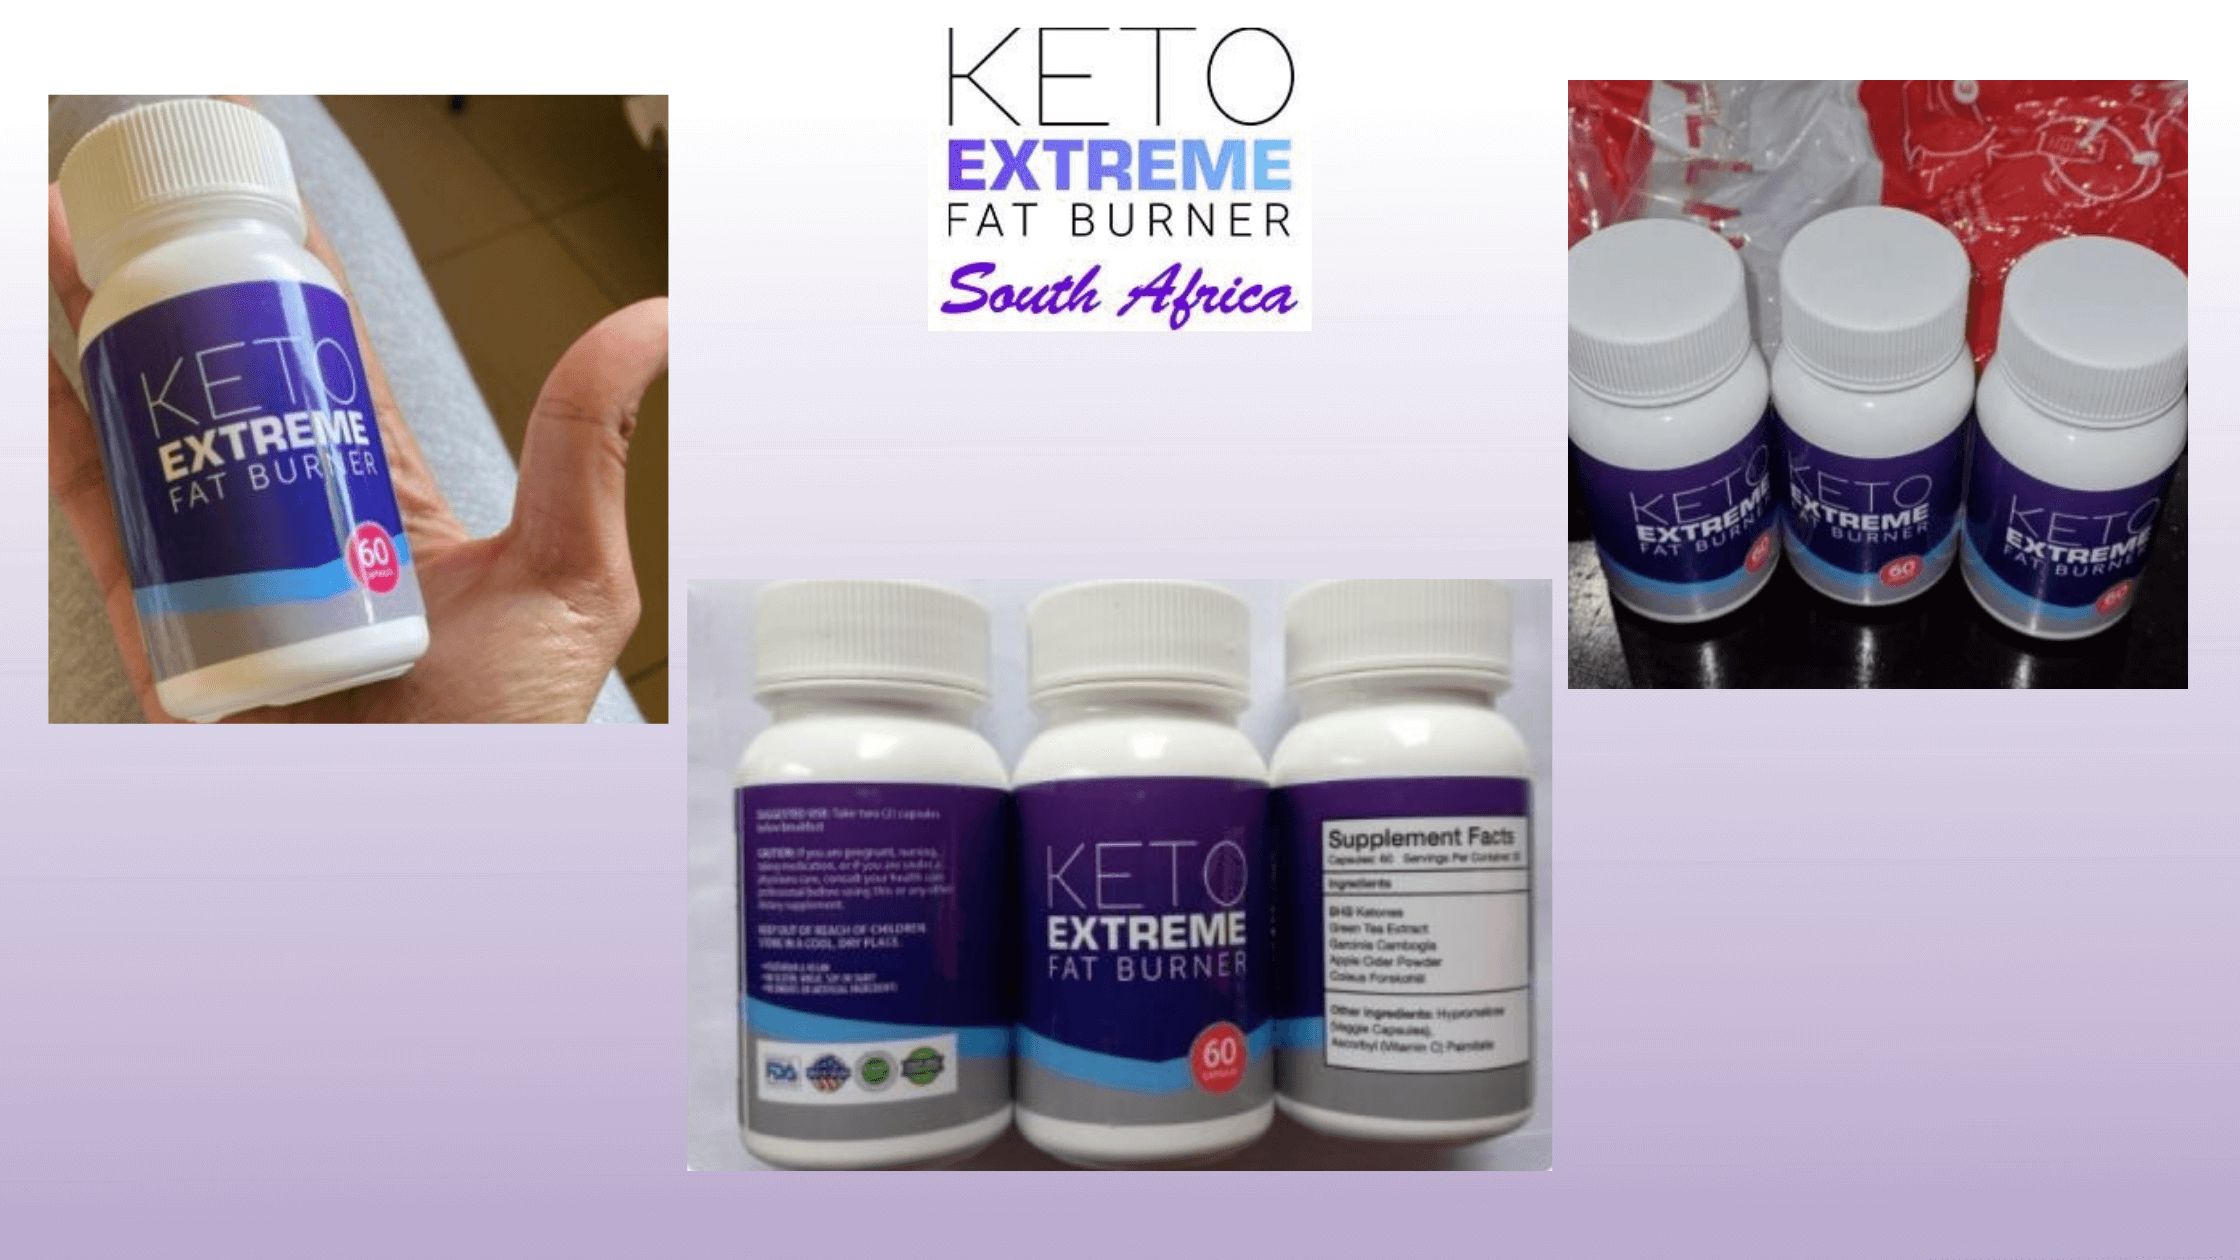 Keto Extreme Fat Burner South Africa Real Reviews